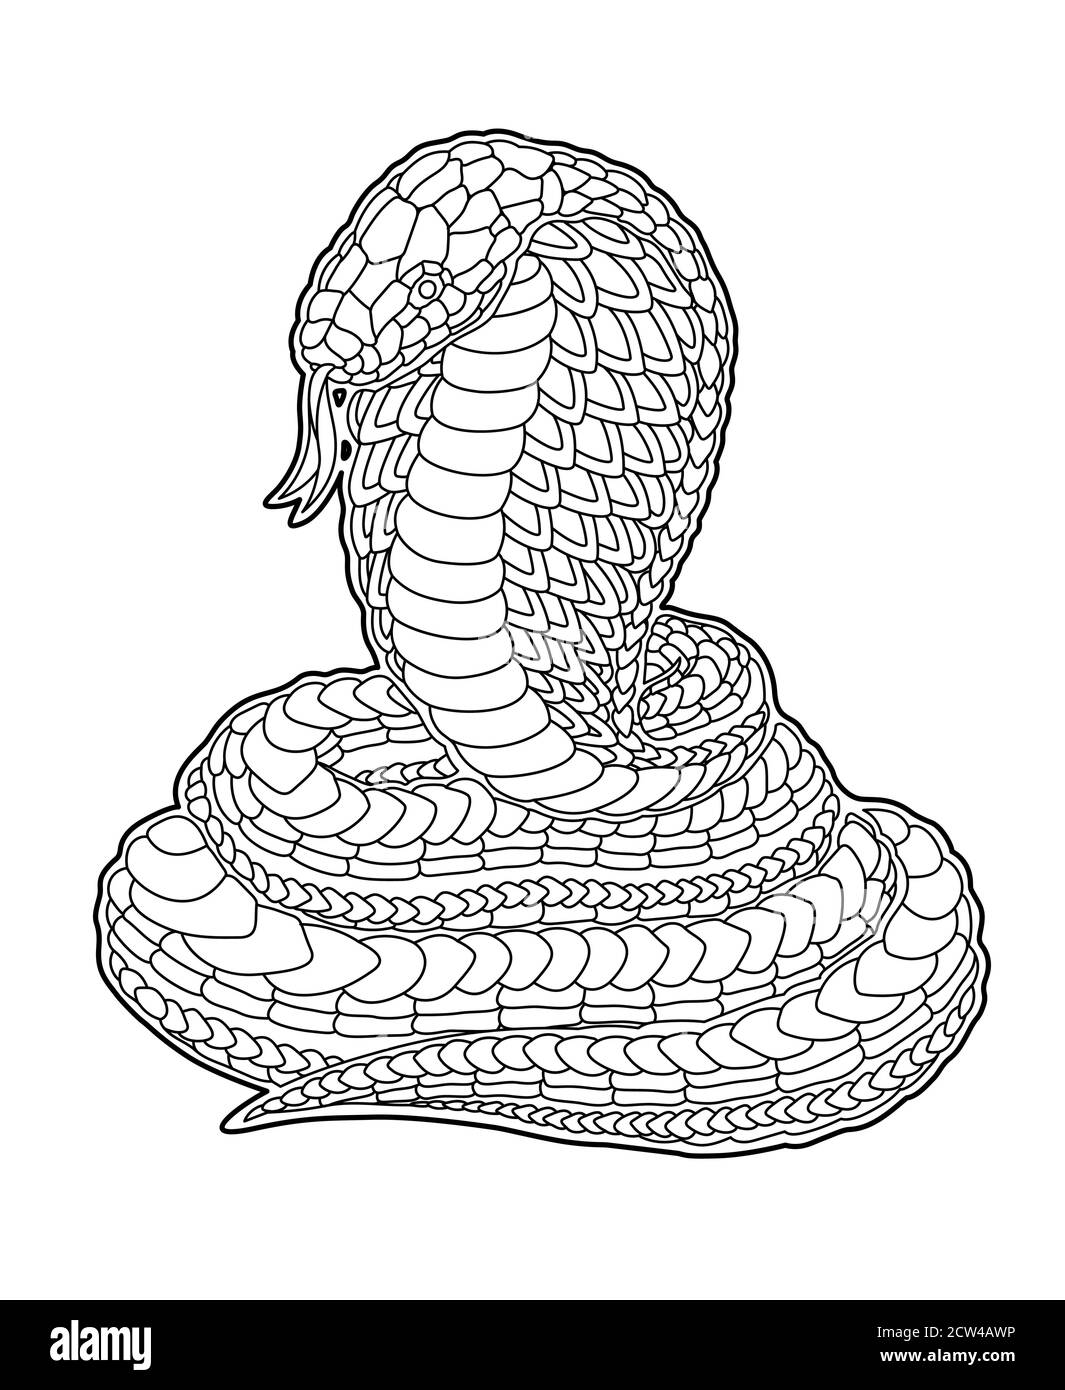 coloring pages of cobras